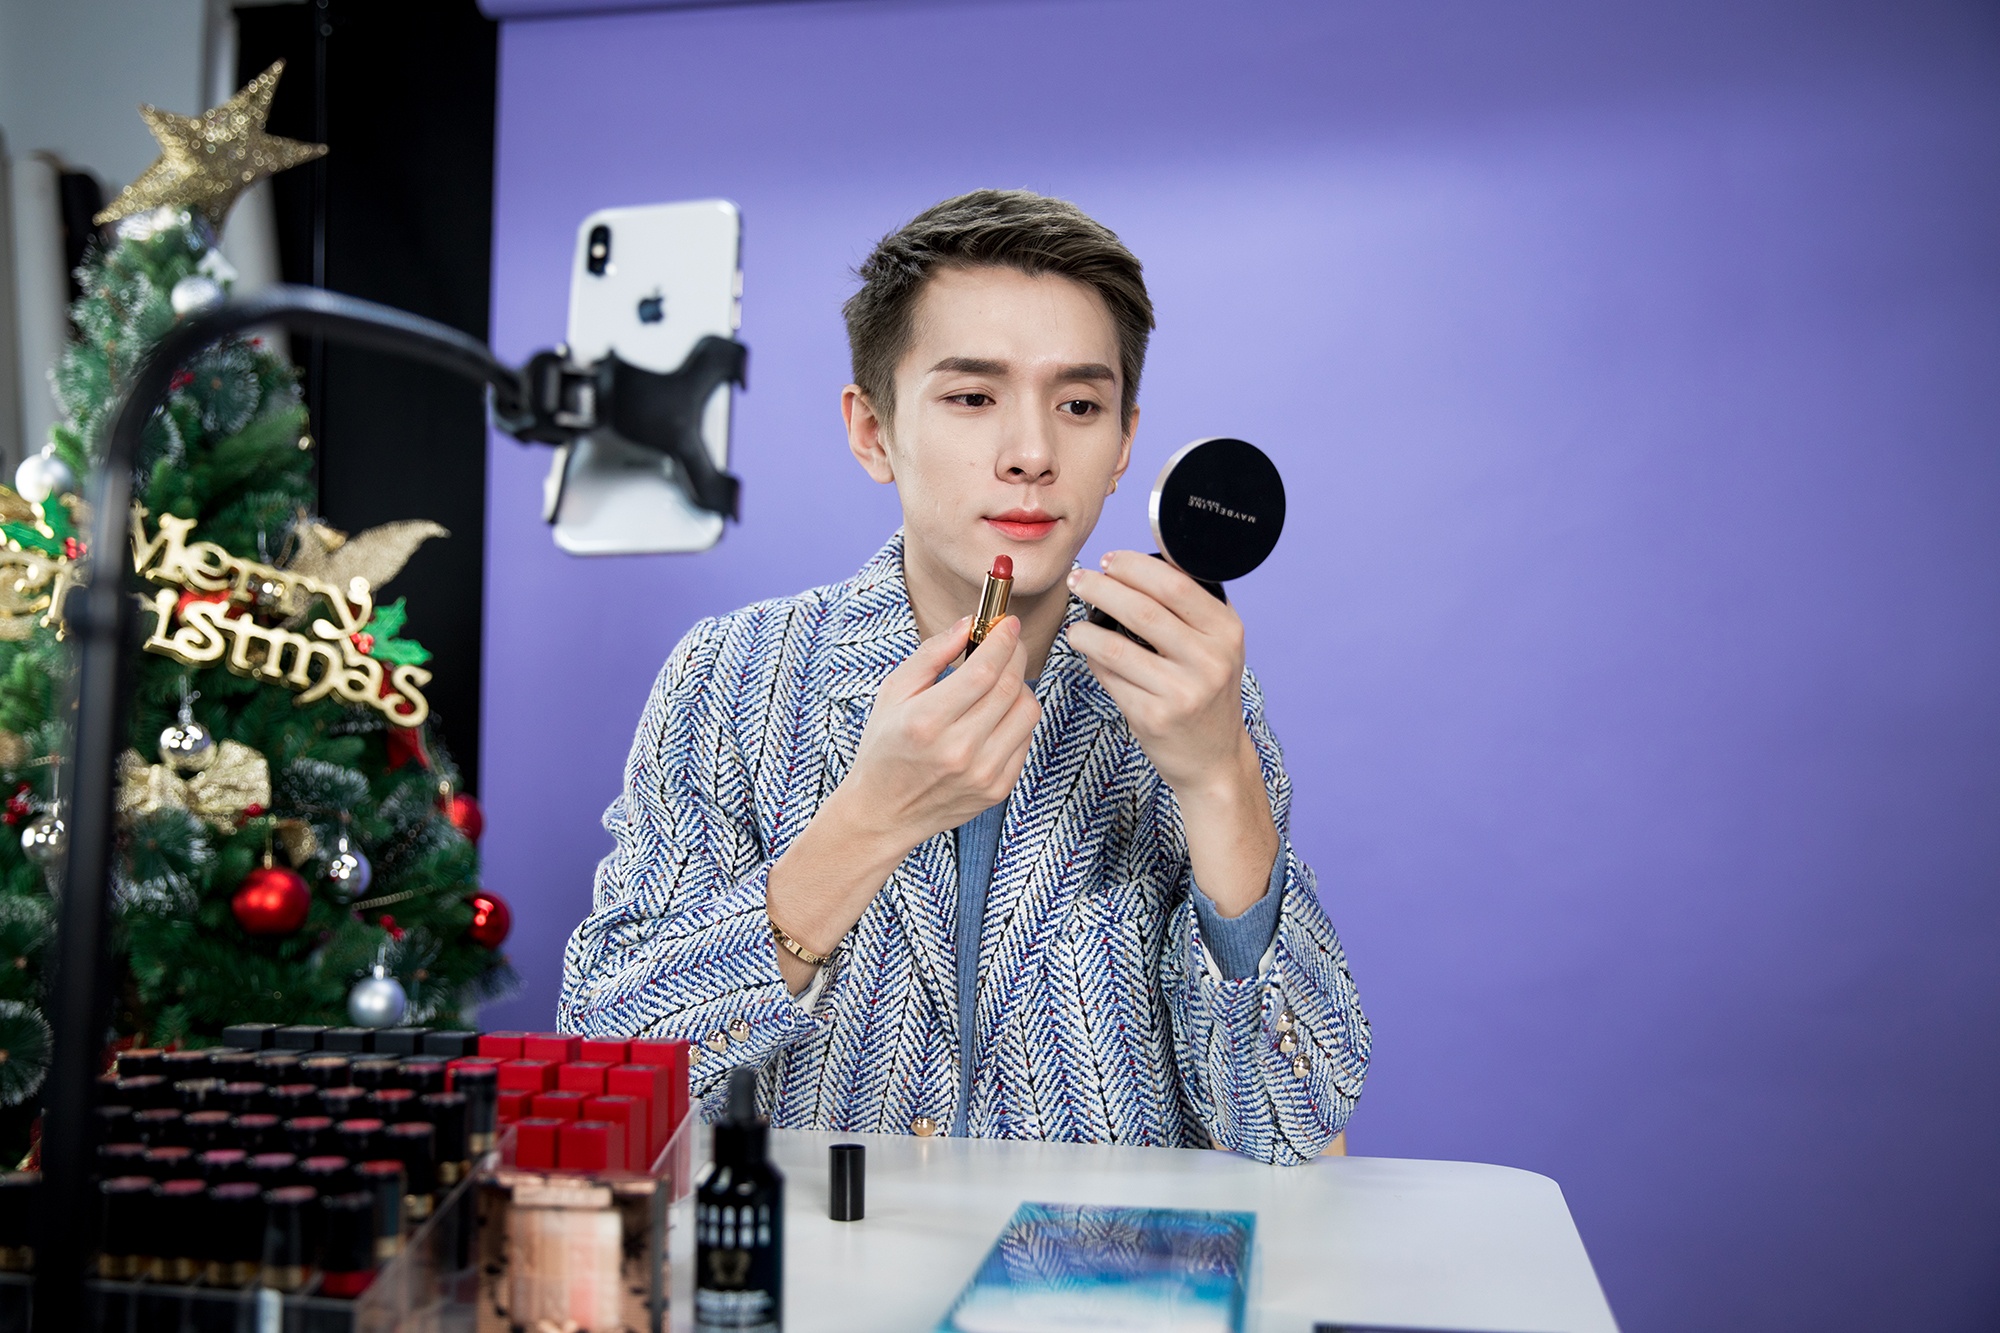 Beauty blogger Austin Li Jiaqi applies lipstick on his mouth while livestreaming on Taobao on January 3, 2018 in Shanghai. Photo: Ghetty Images